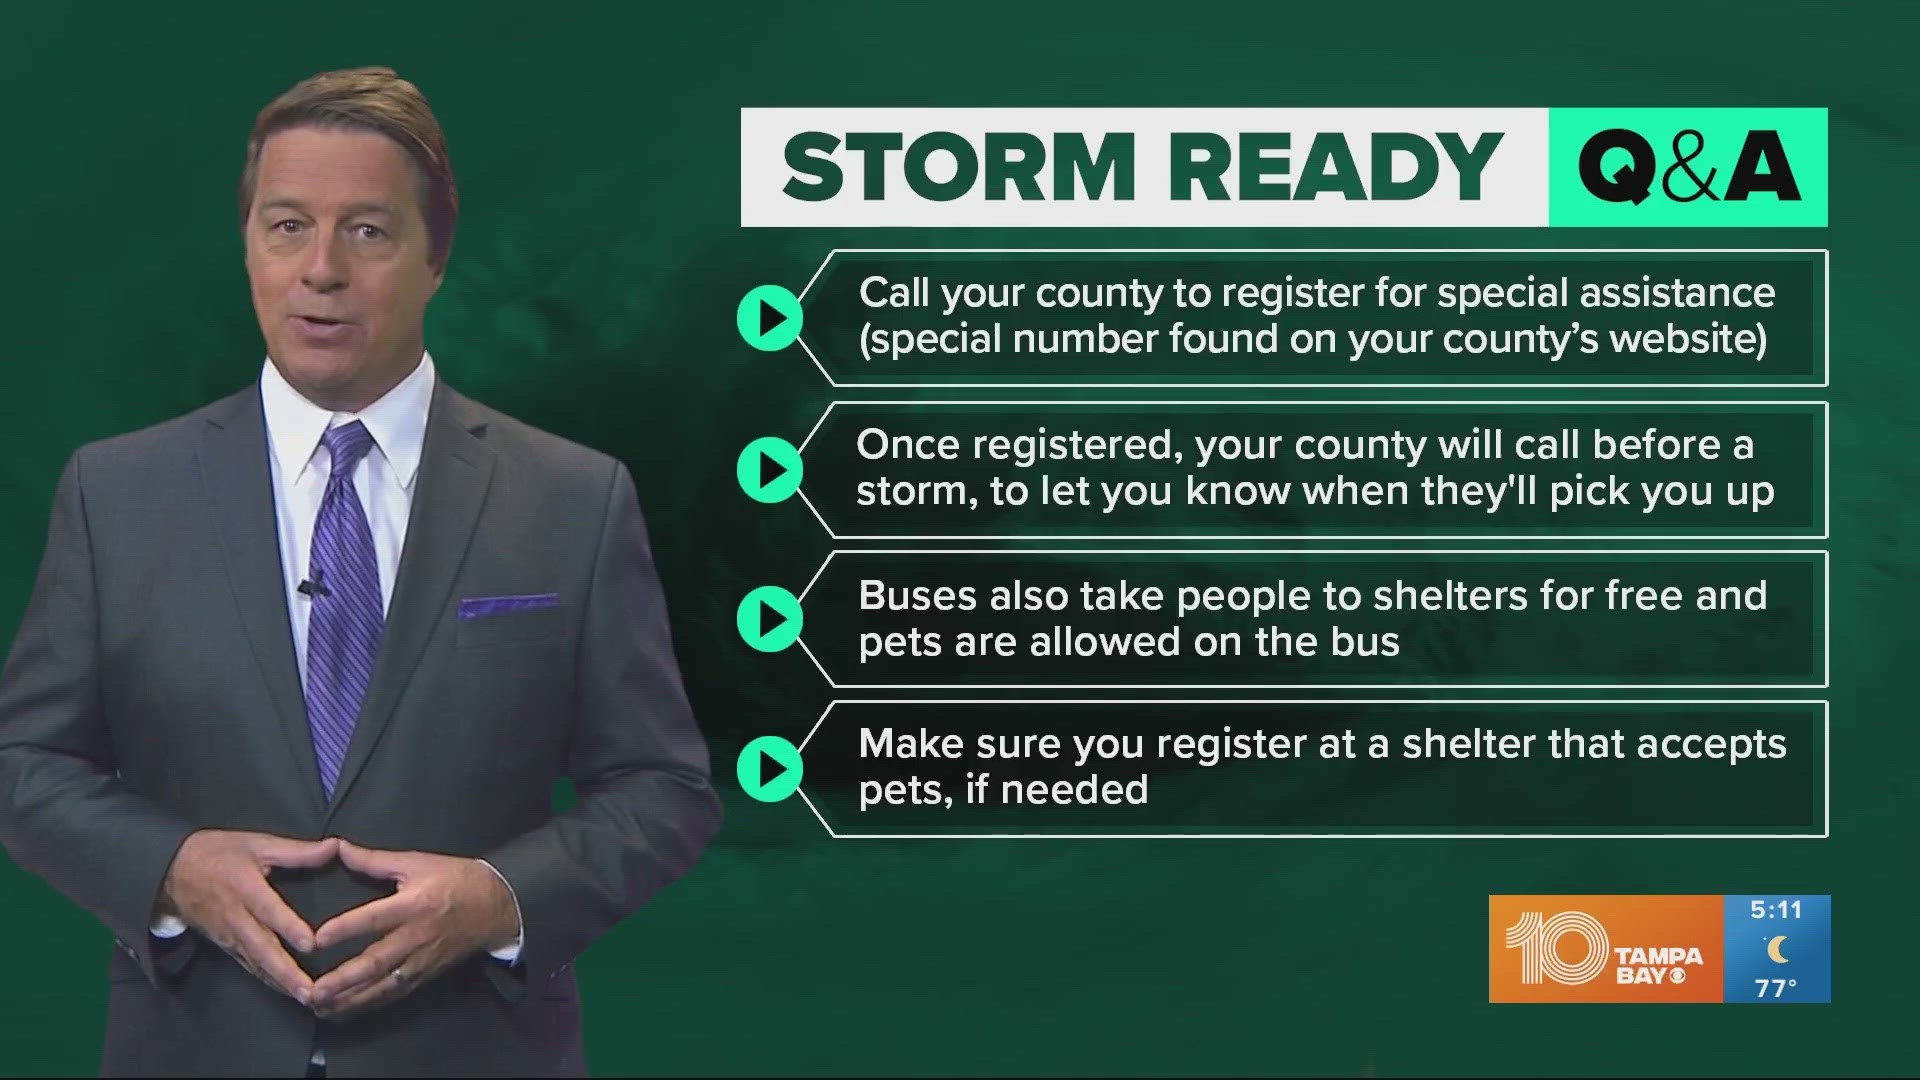 Our 10 Weather team has the tips to keep you storm ready for the long hurricane season.